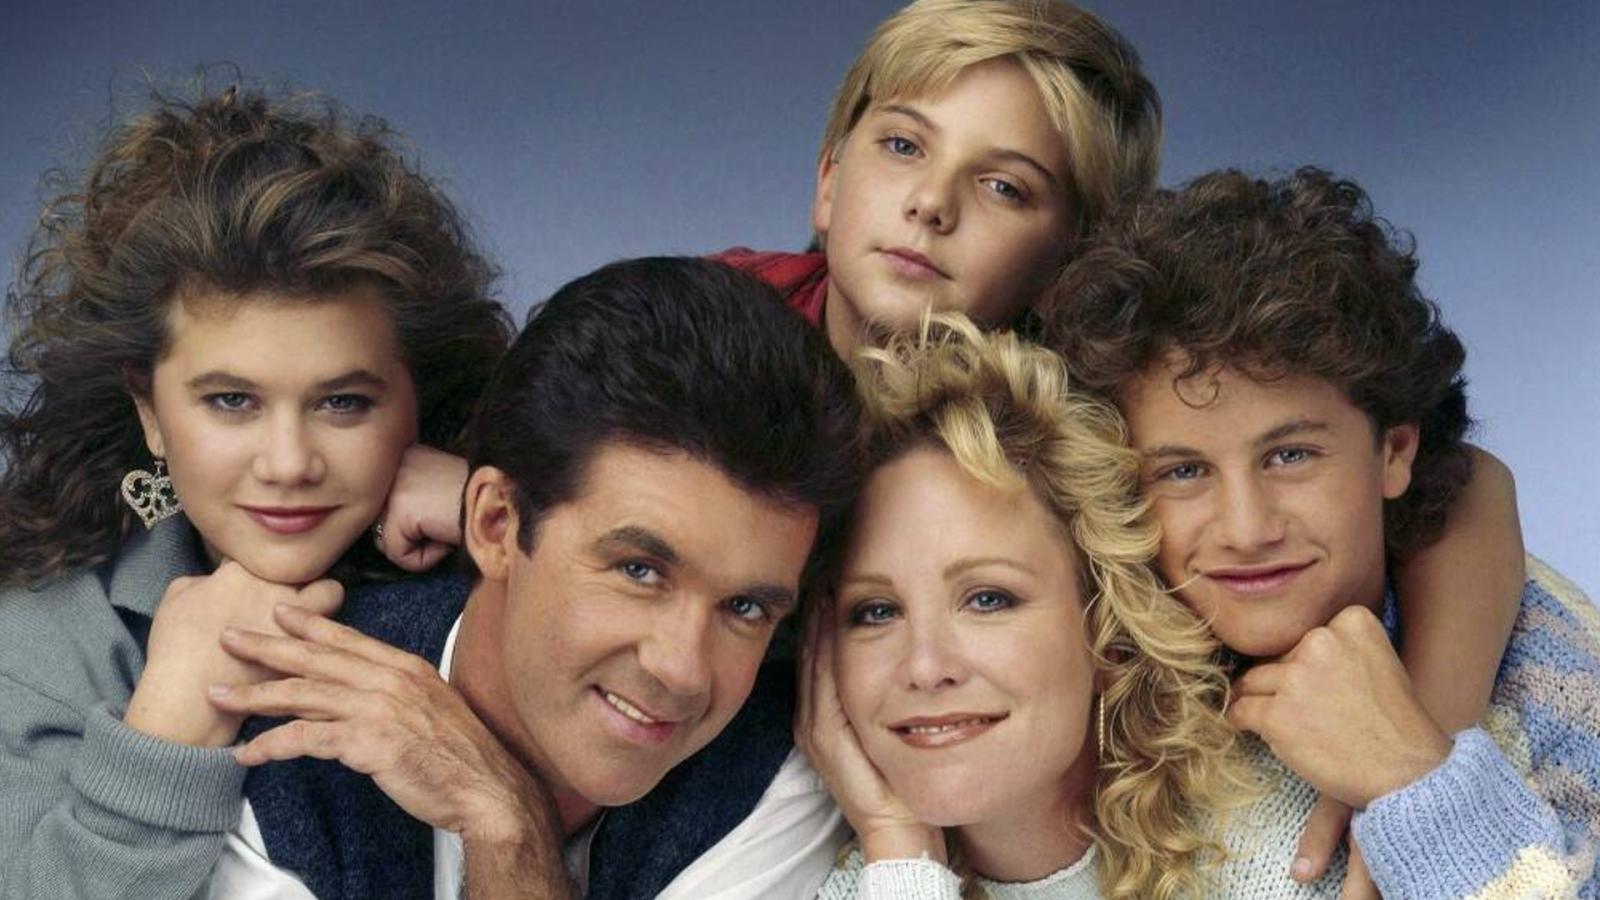 15 Vintage '80s Shows That Are More Binge-Worthy Than Today's Hits - image 10